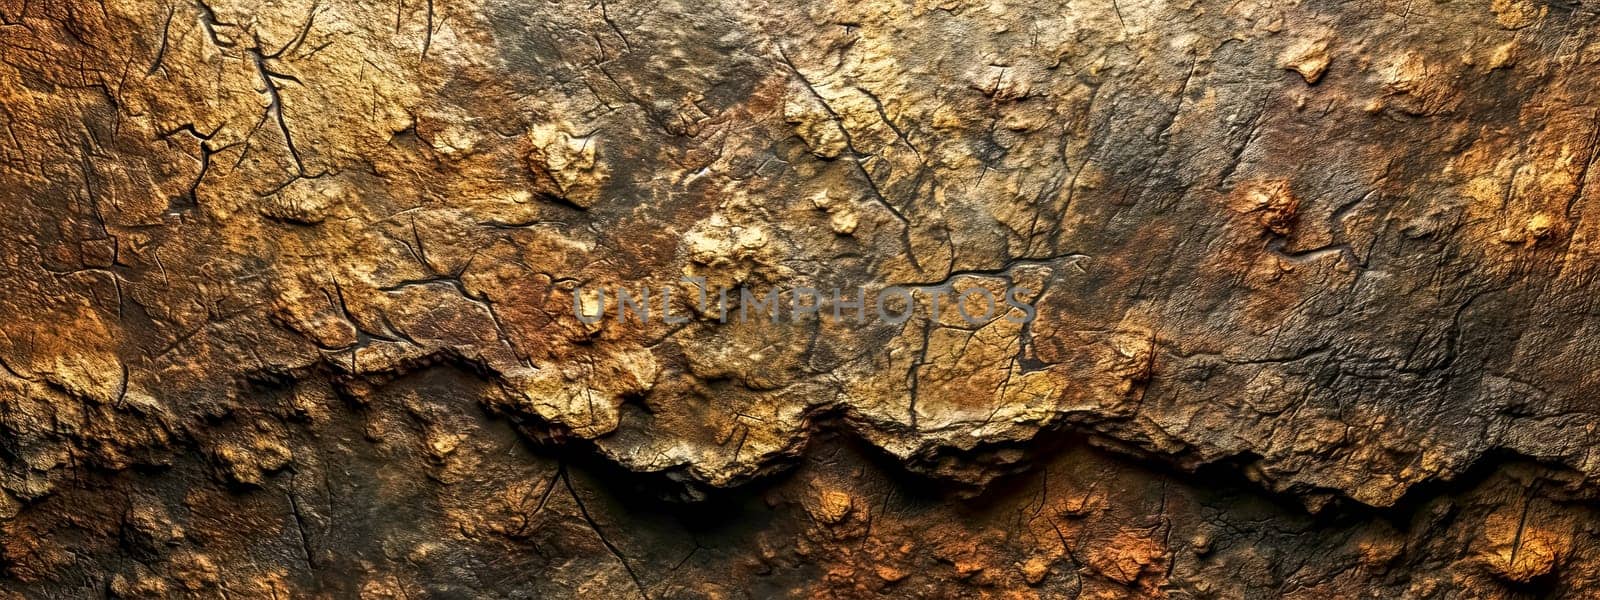 natural beauty and complexity of a rock surface, highlighted by the warm, golden lighting that accentuates its rugged texture and the deep crevices that run through it by Edophoto